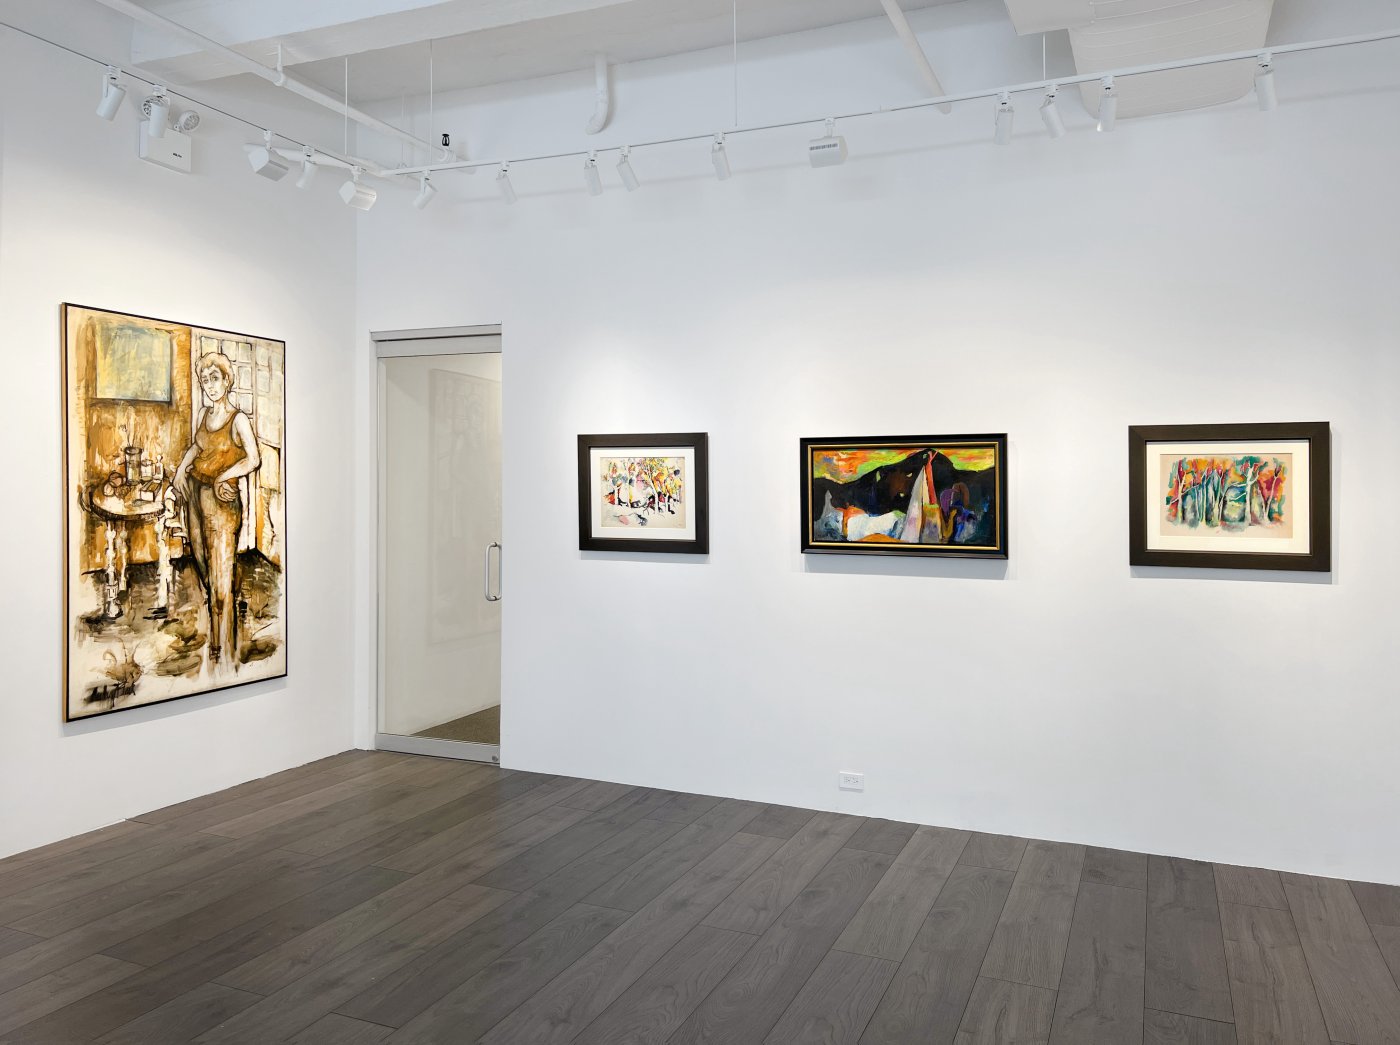 Installation image for Audrey Flack: Force of Nature, at Hollis Taggart